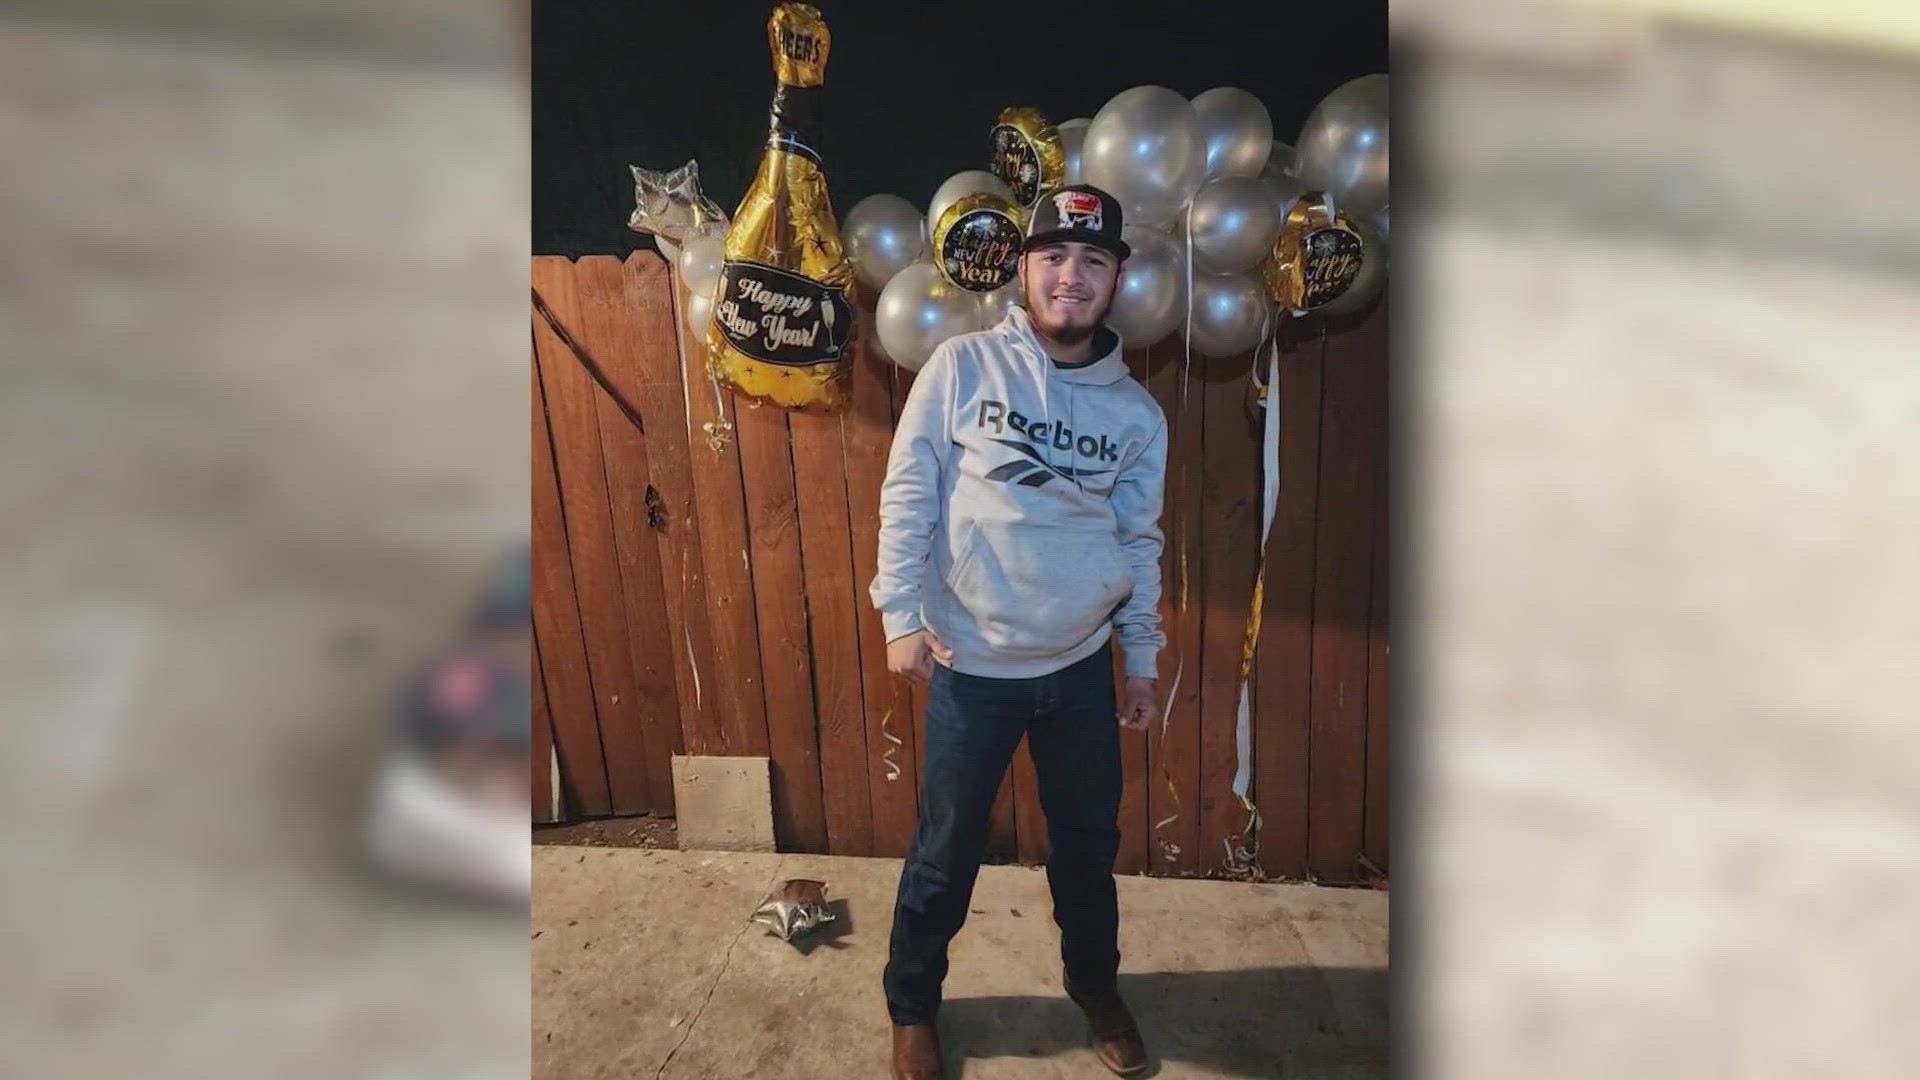 Police say there were approximately 100 spectators watching a soccer game when someone fired off multiple rounds into the crowd, killing Erick Rios-Navarro.